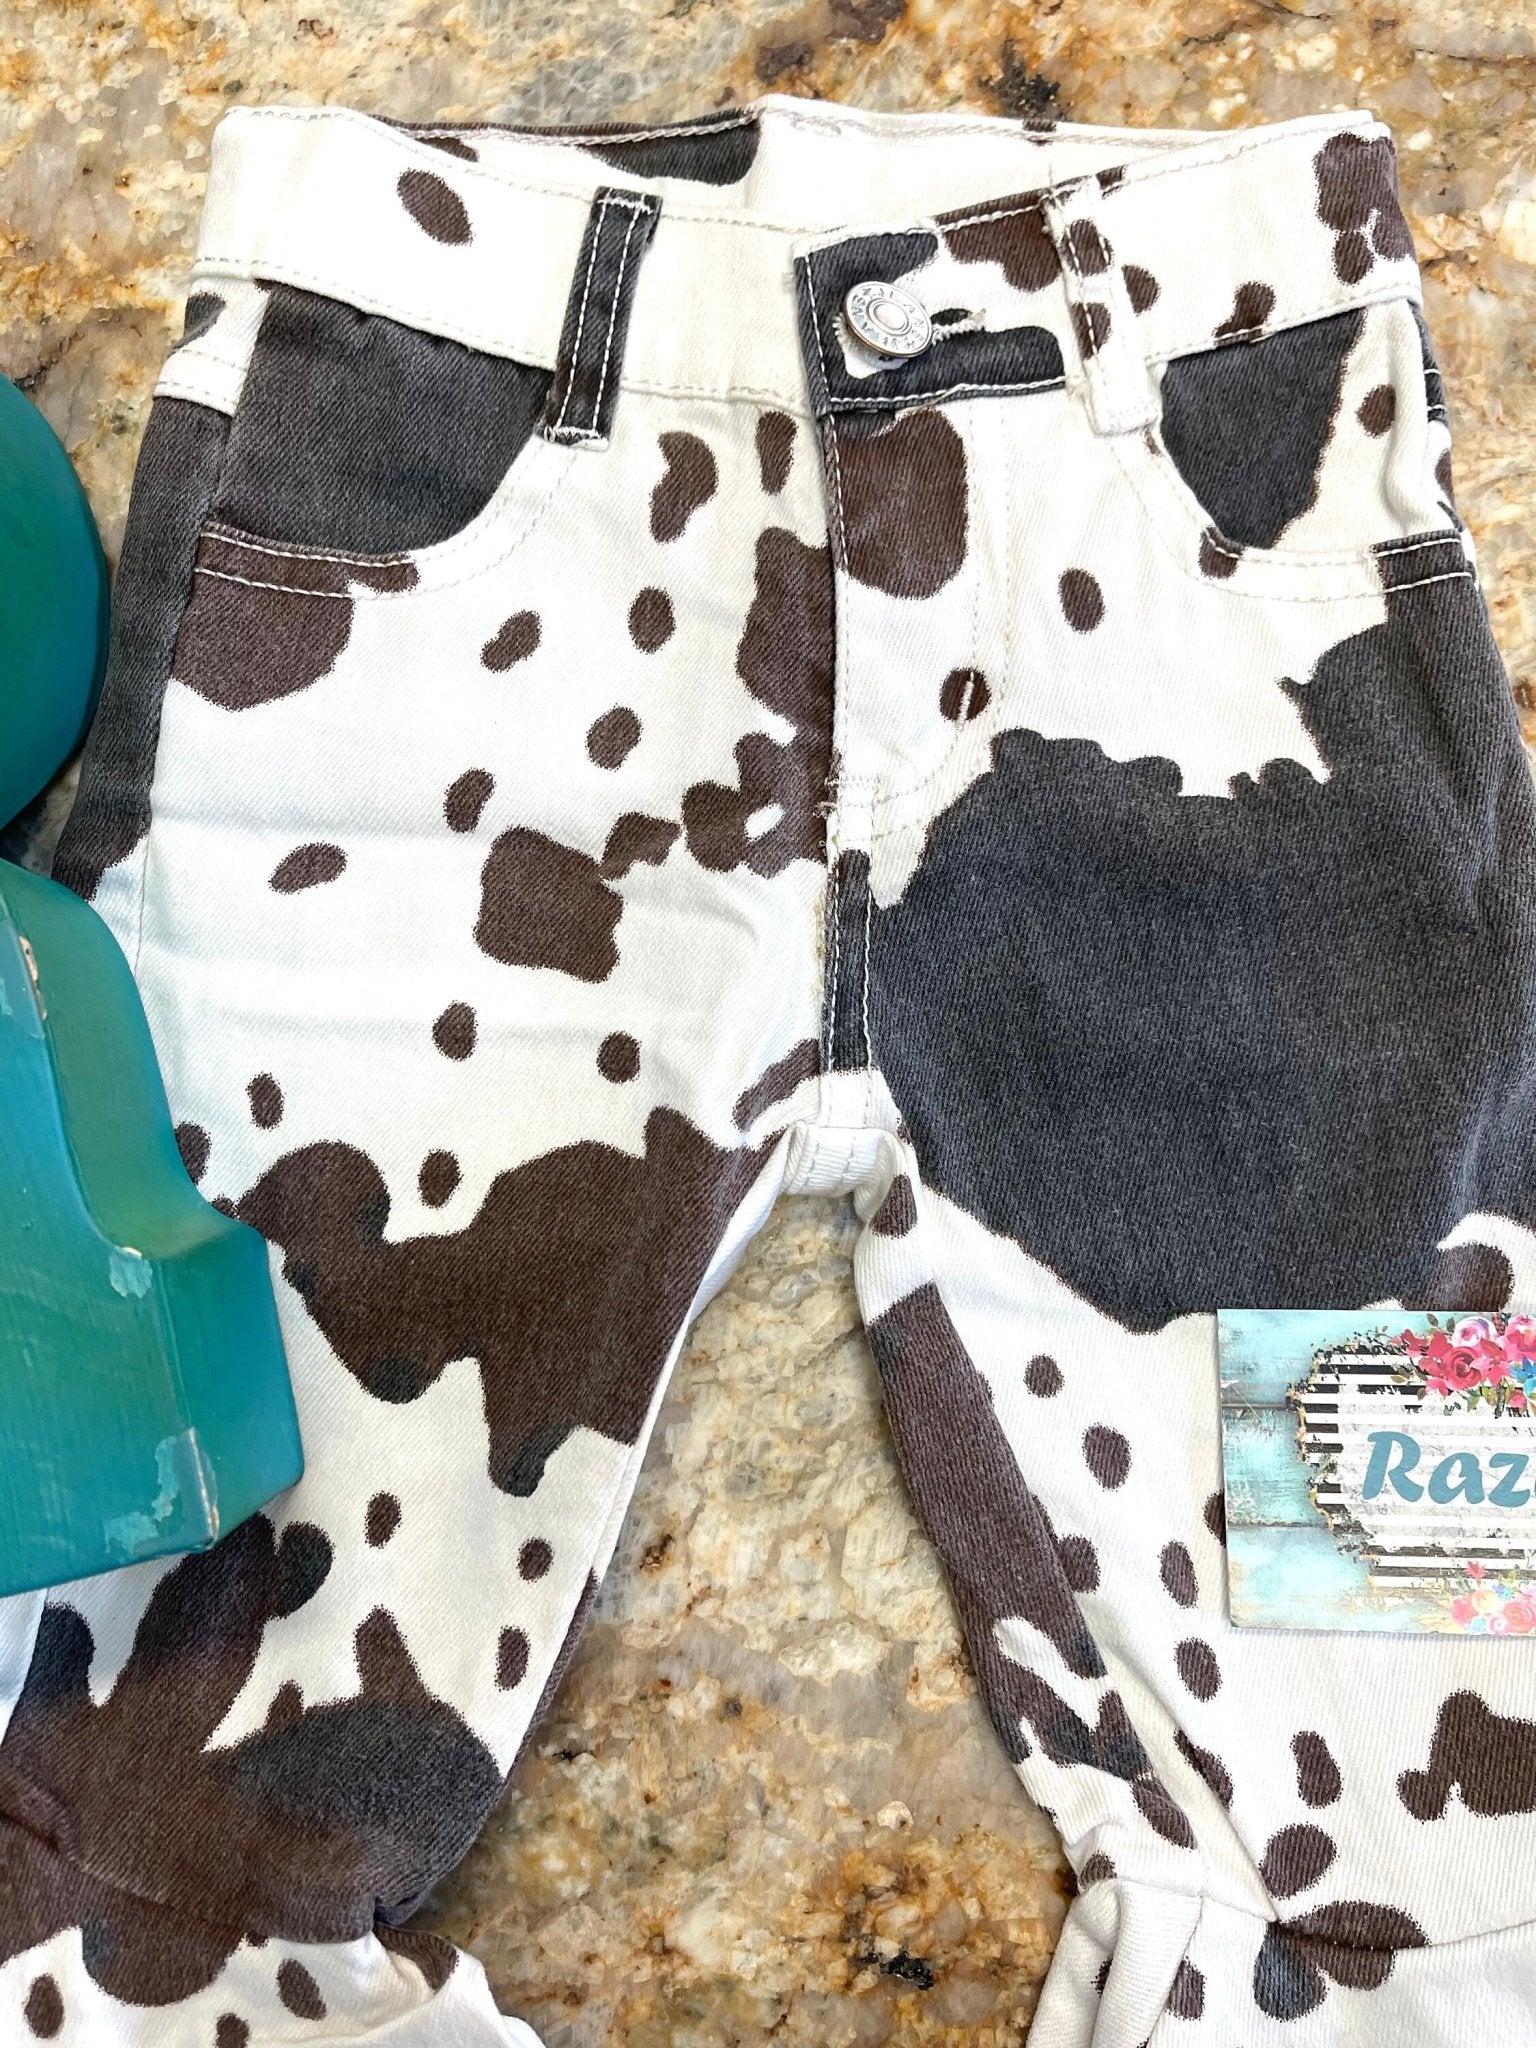 COW print JEANS, Cowgirl Bell Bottom Jeans - Razels